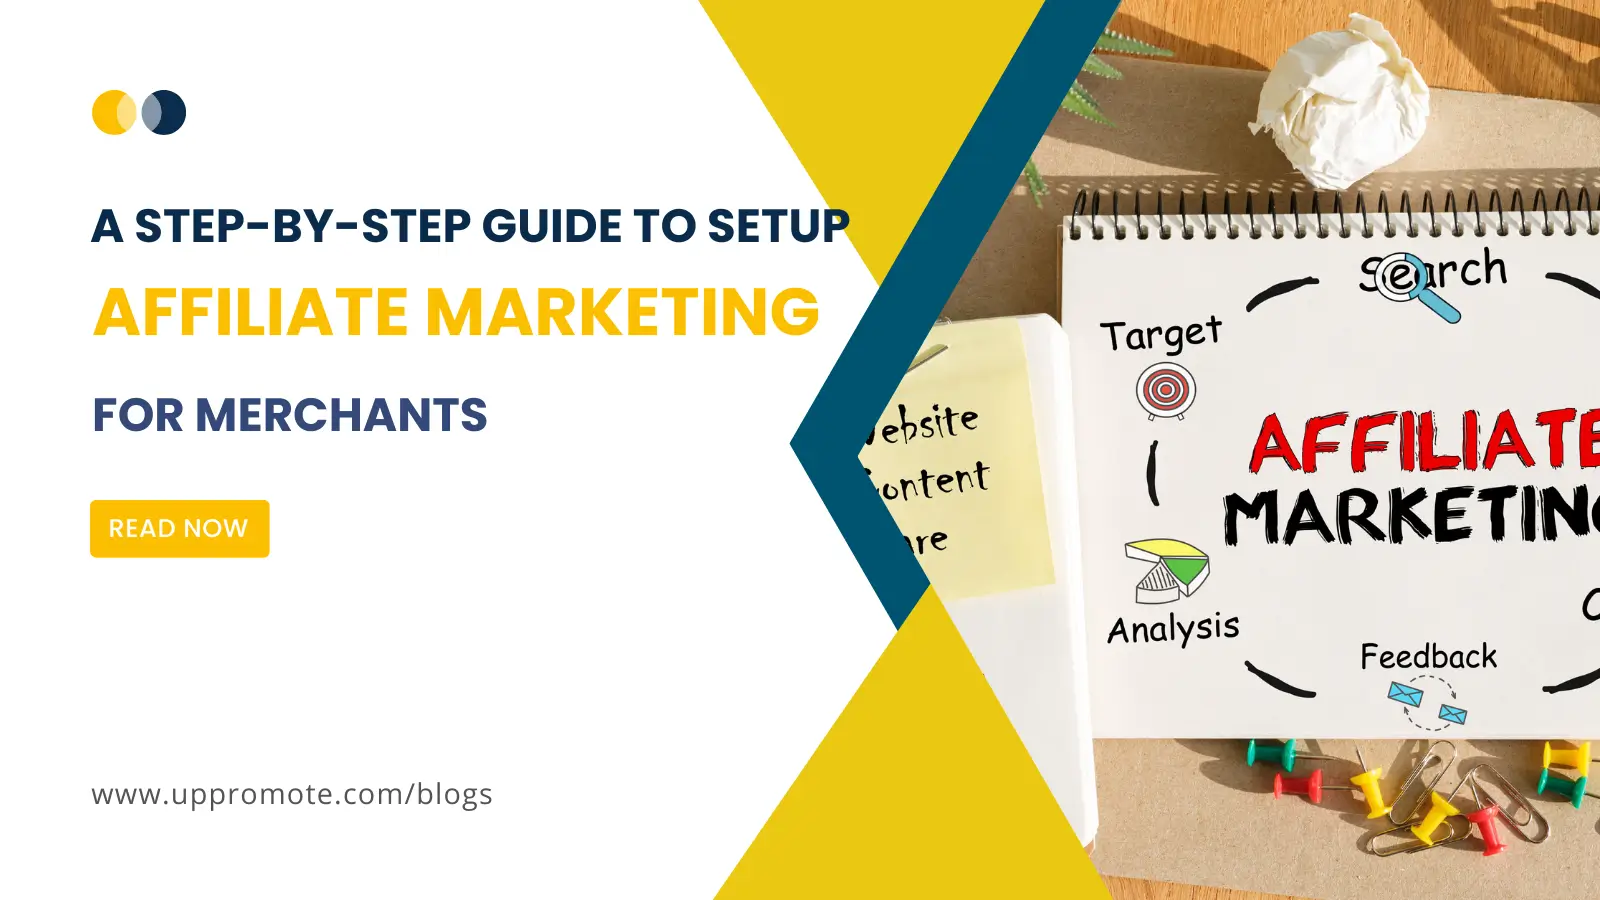 A step-by-step guide to setup affiliate marketing for merchants